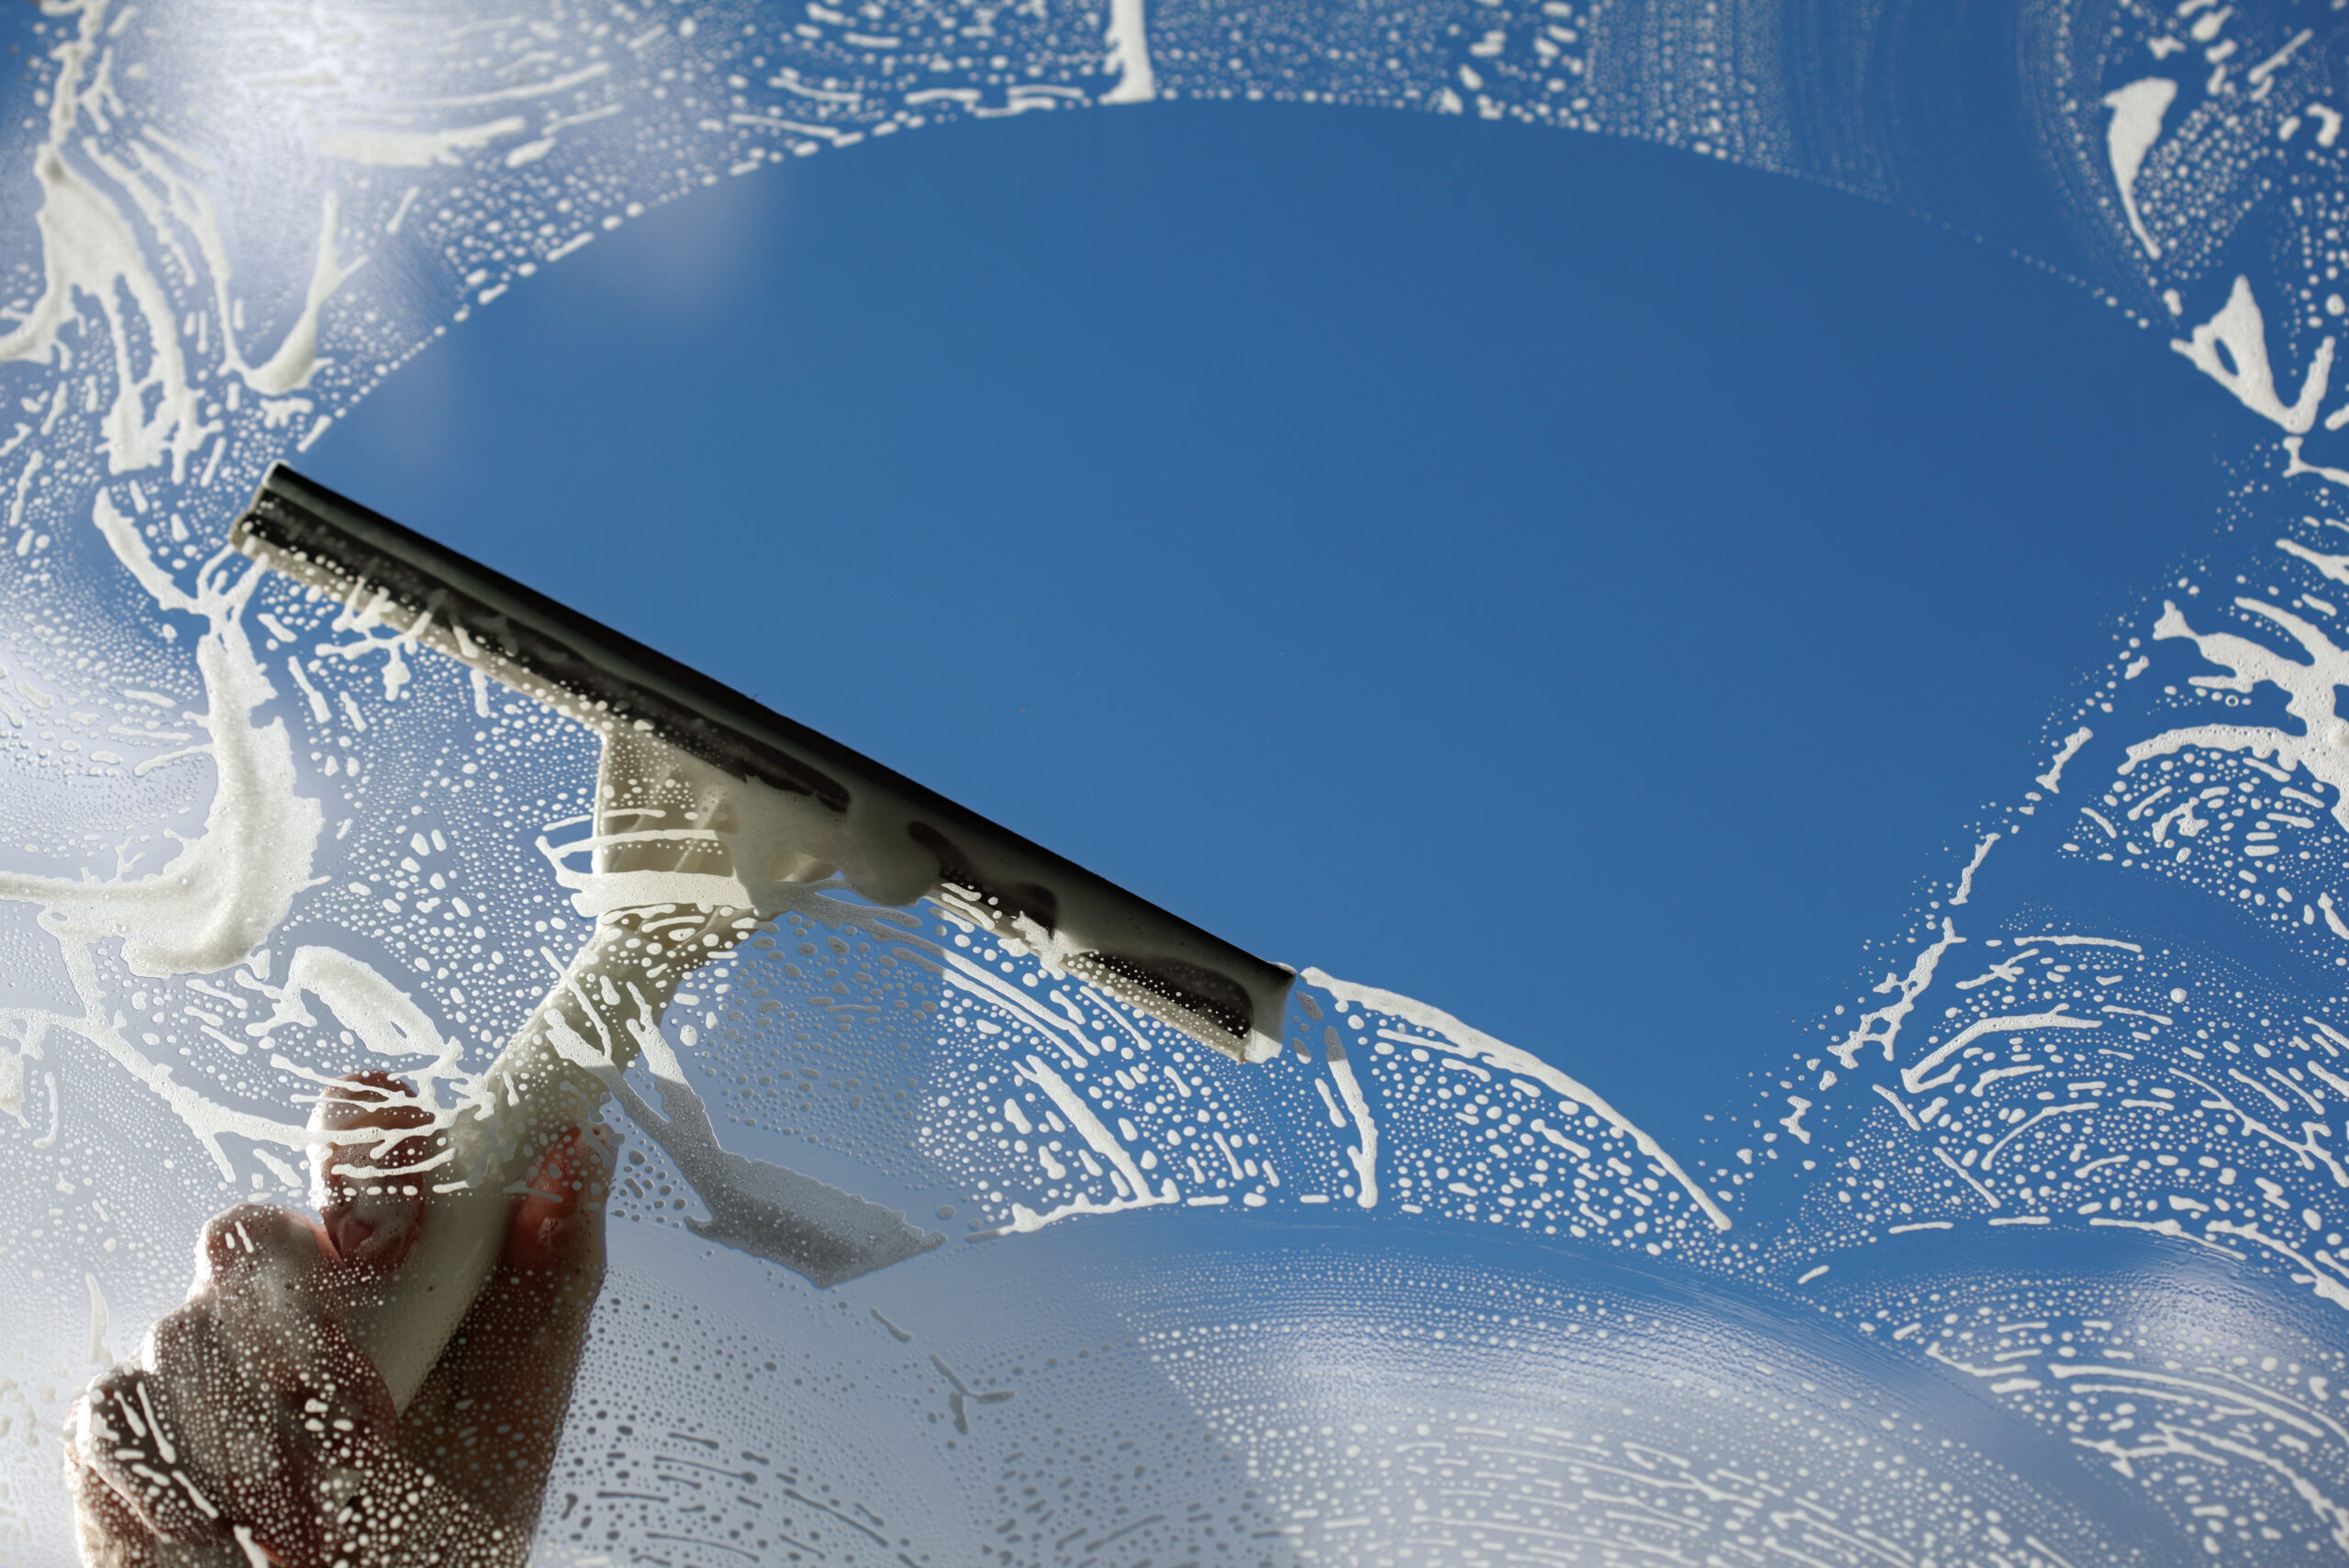 Hand using a squeegee for spring cleaning, with soap suds visible across the window against a clear blue sky.